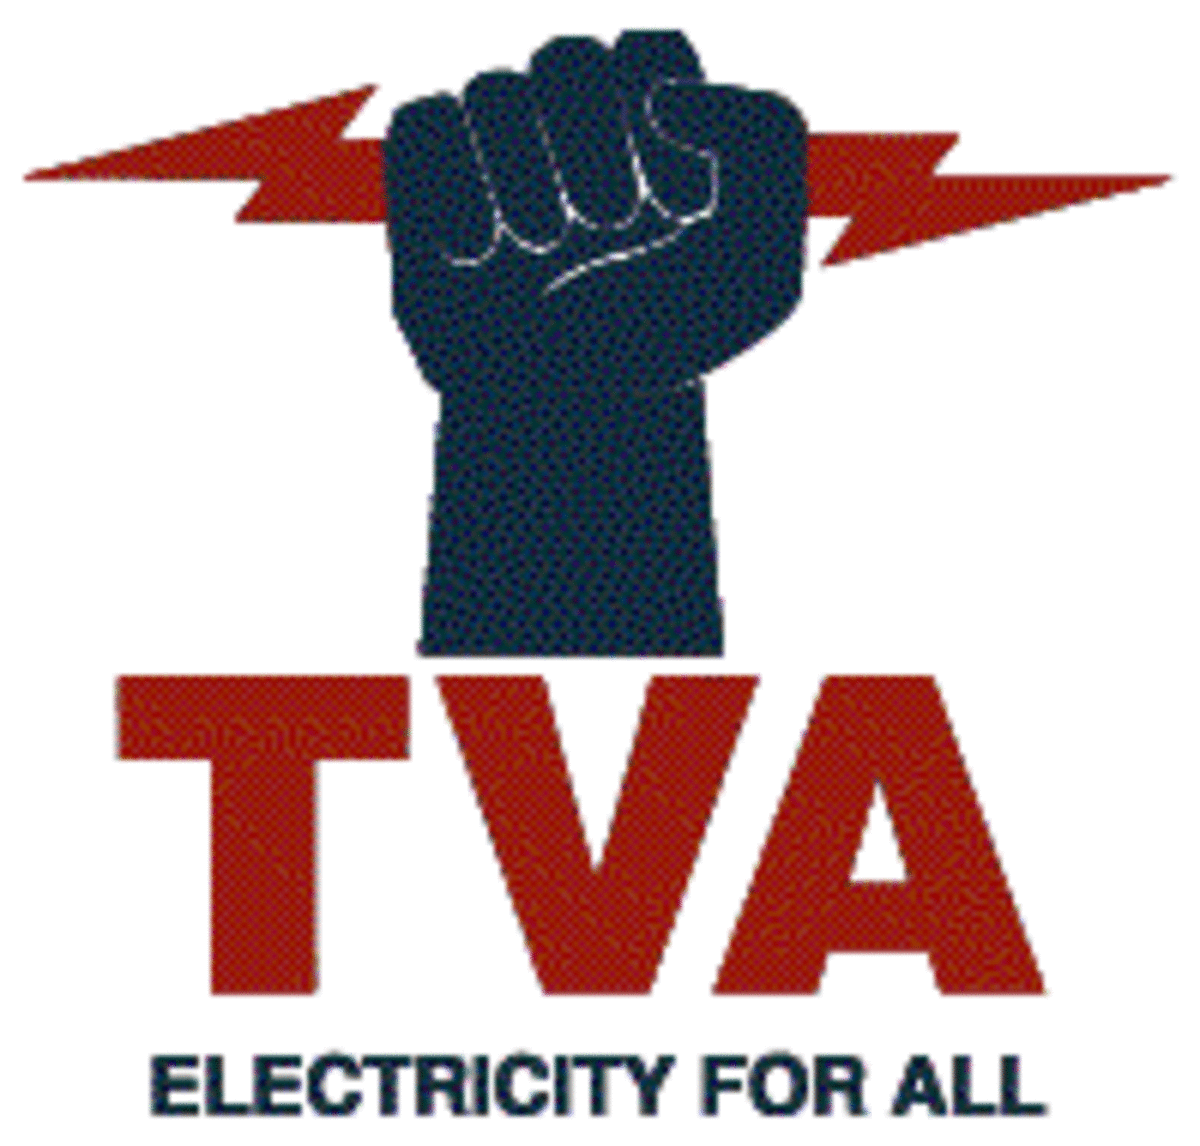 The Trial Court Agreed With the TVA But Was Overruled by the Court of Appeals